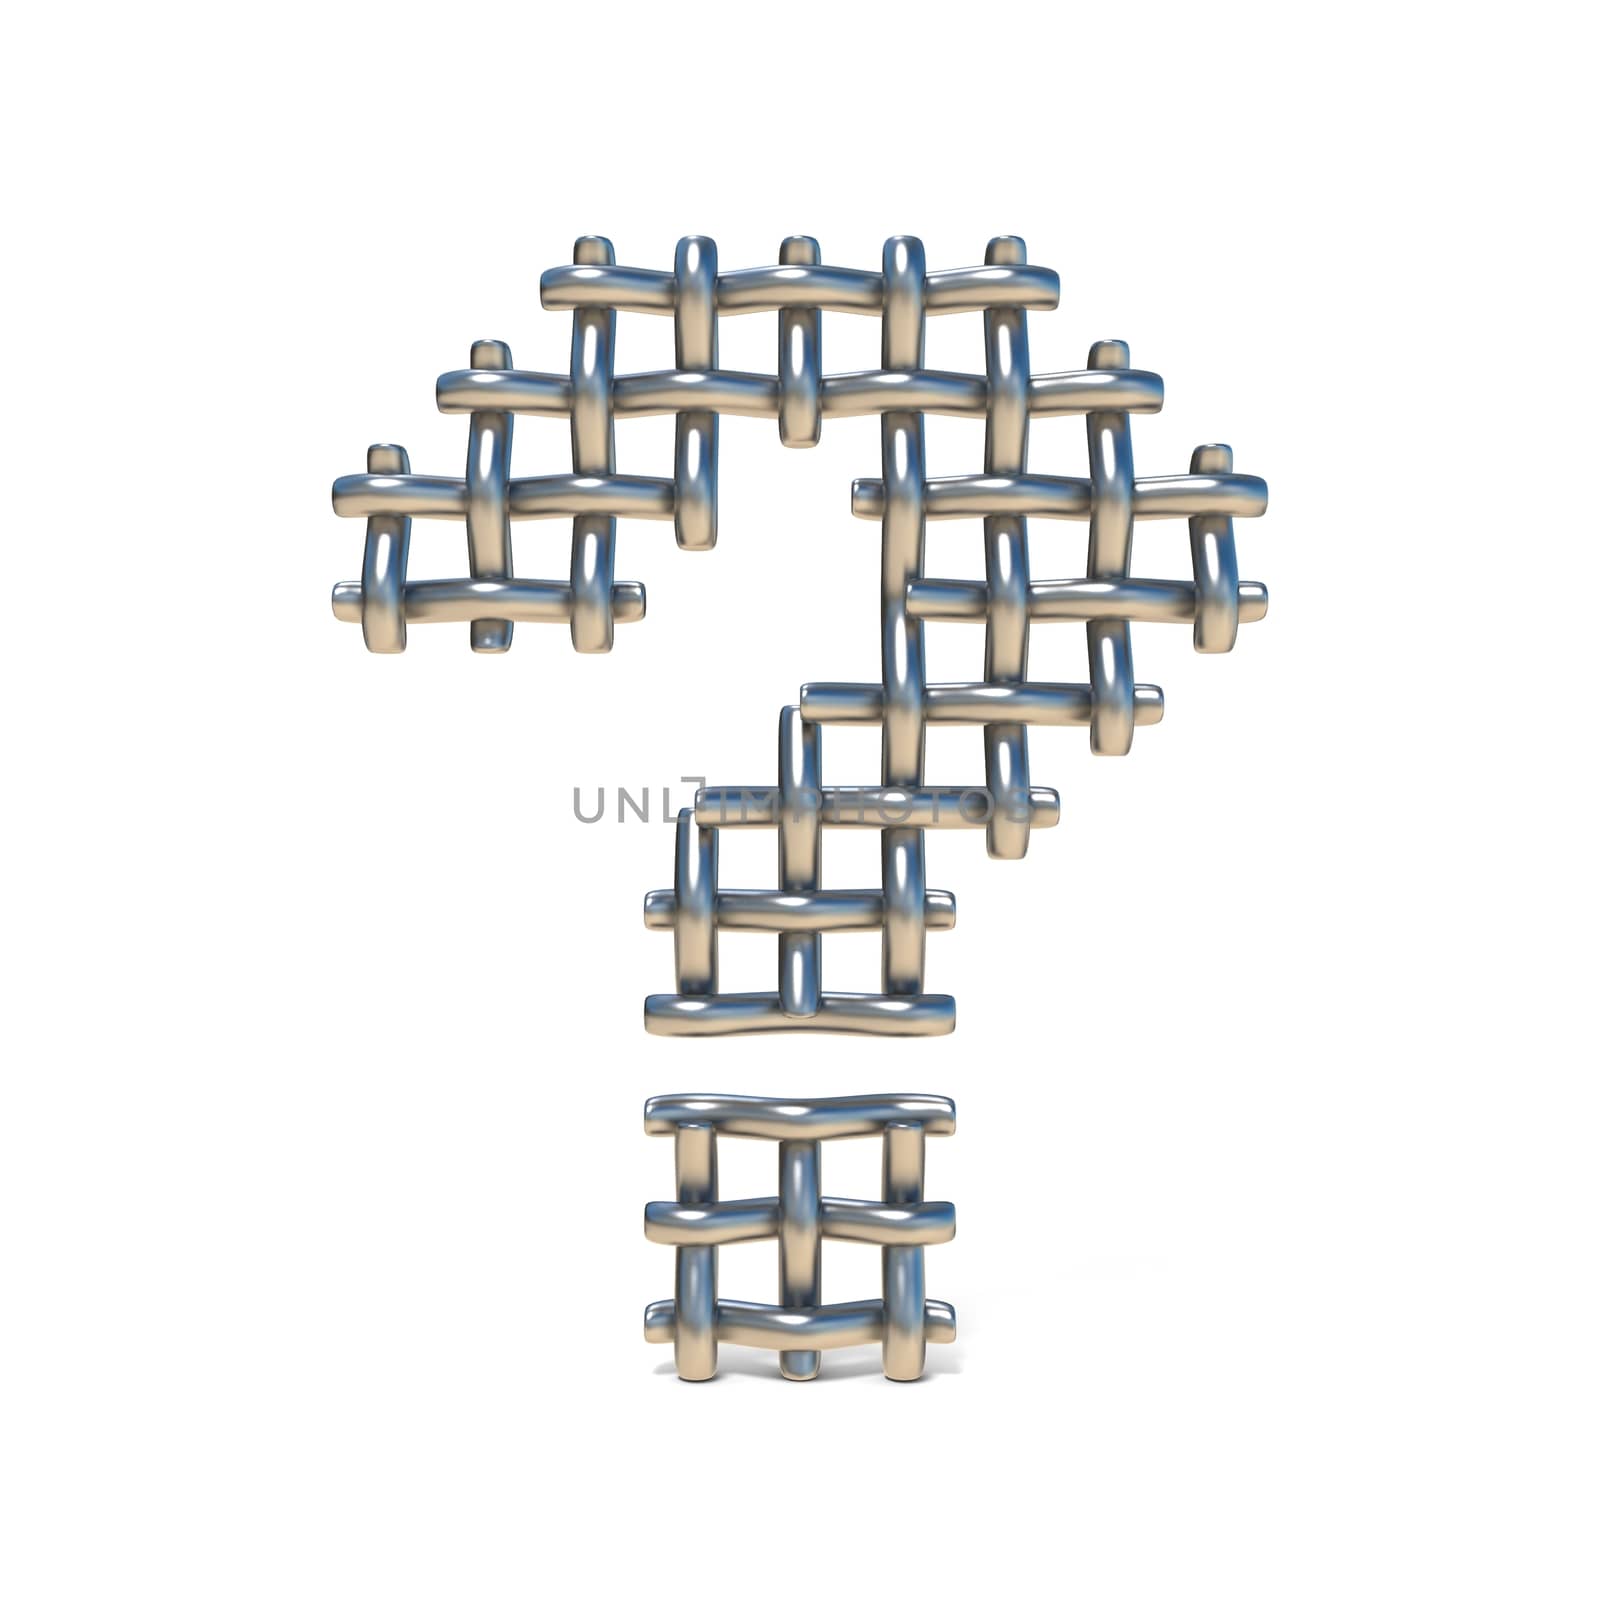 Metal wire mesh font QUESTION MARK 3D render illustration isolated on white background